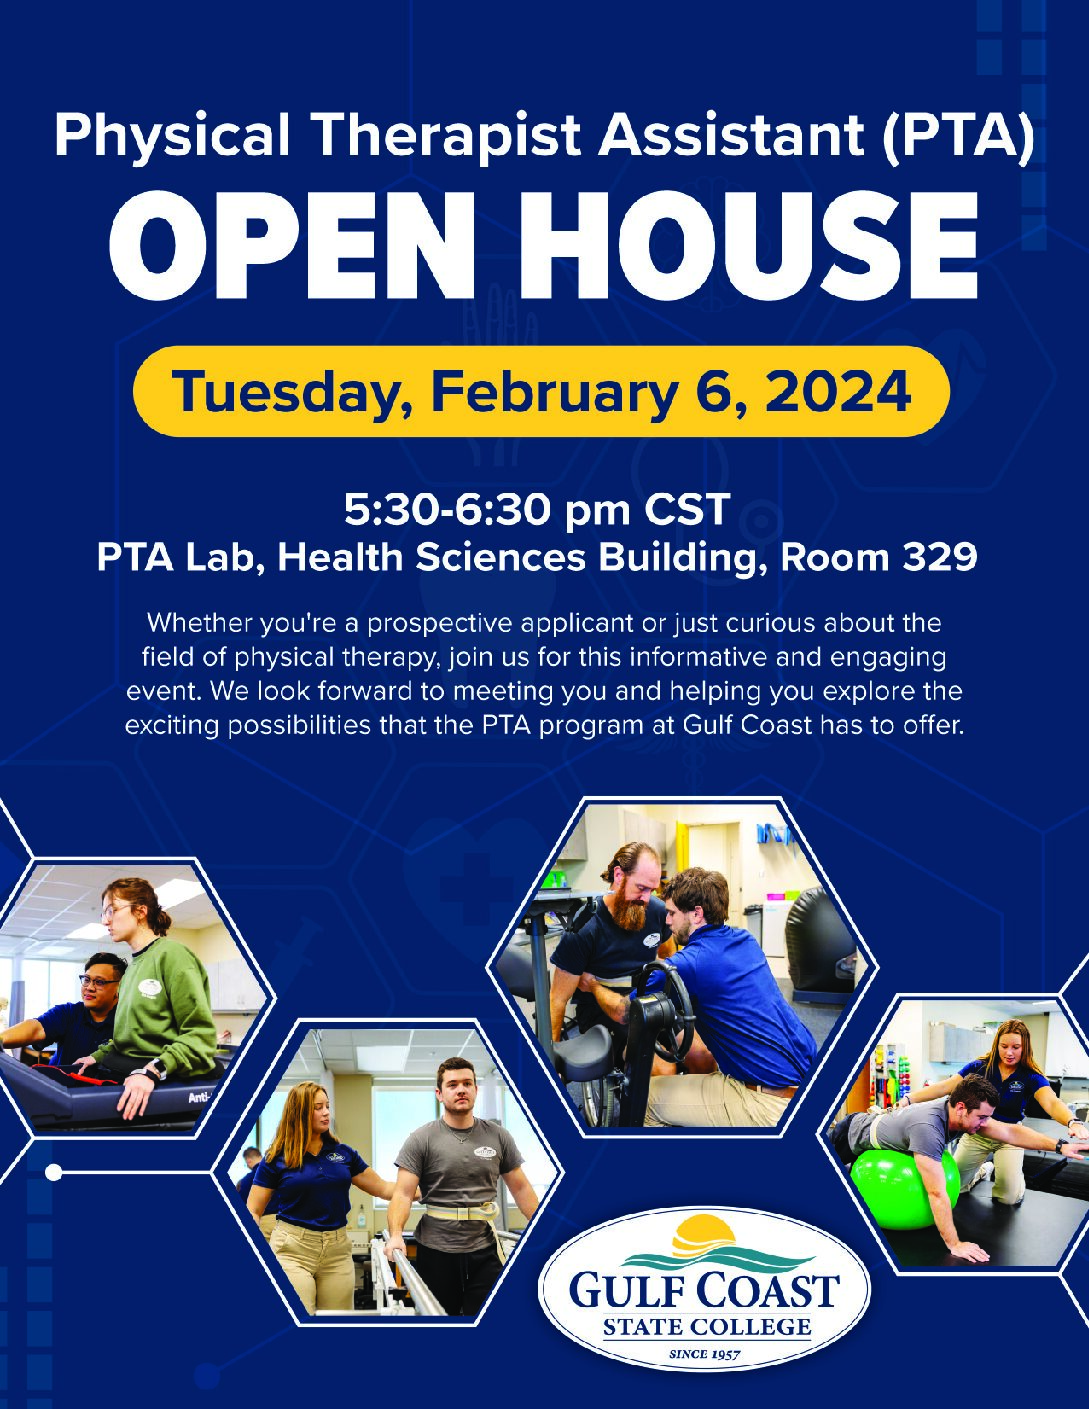 GCSC Physical Therapist Assistant Program  Hosting Open House